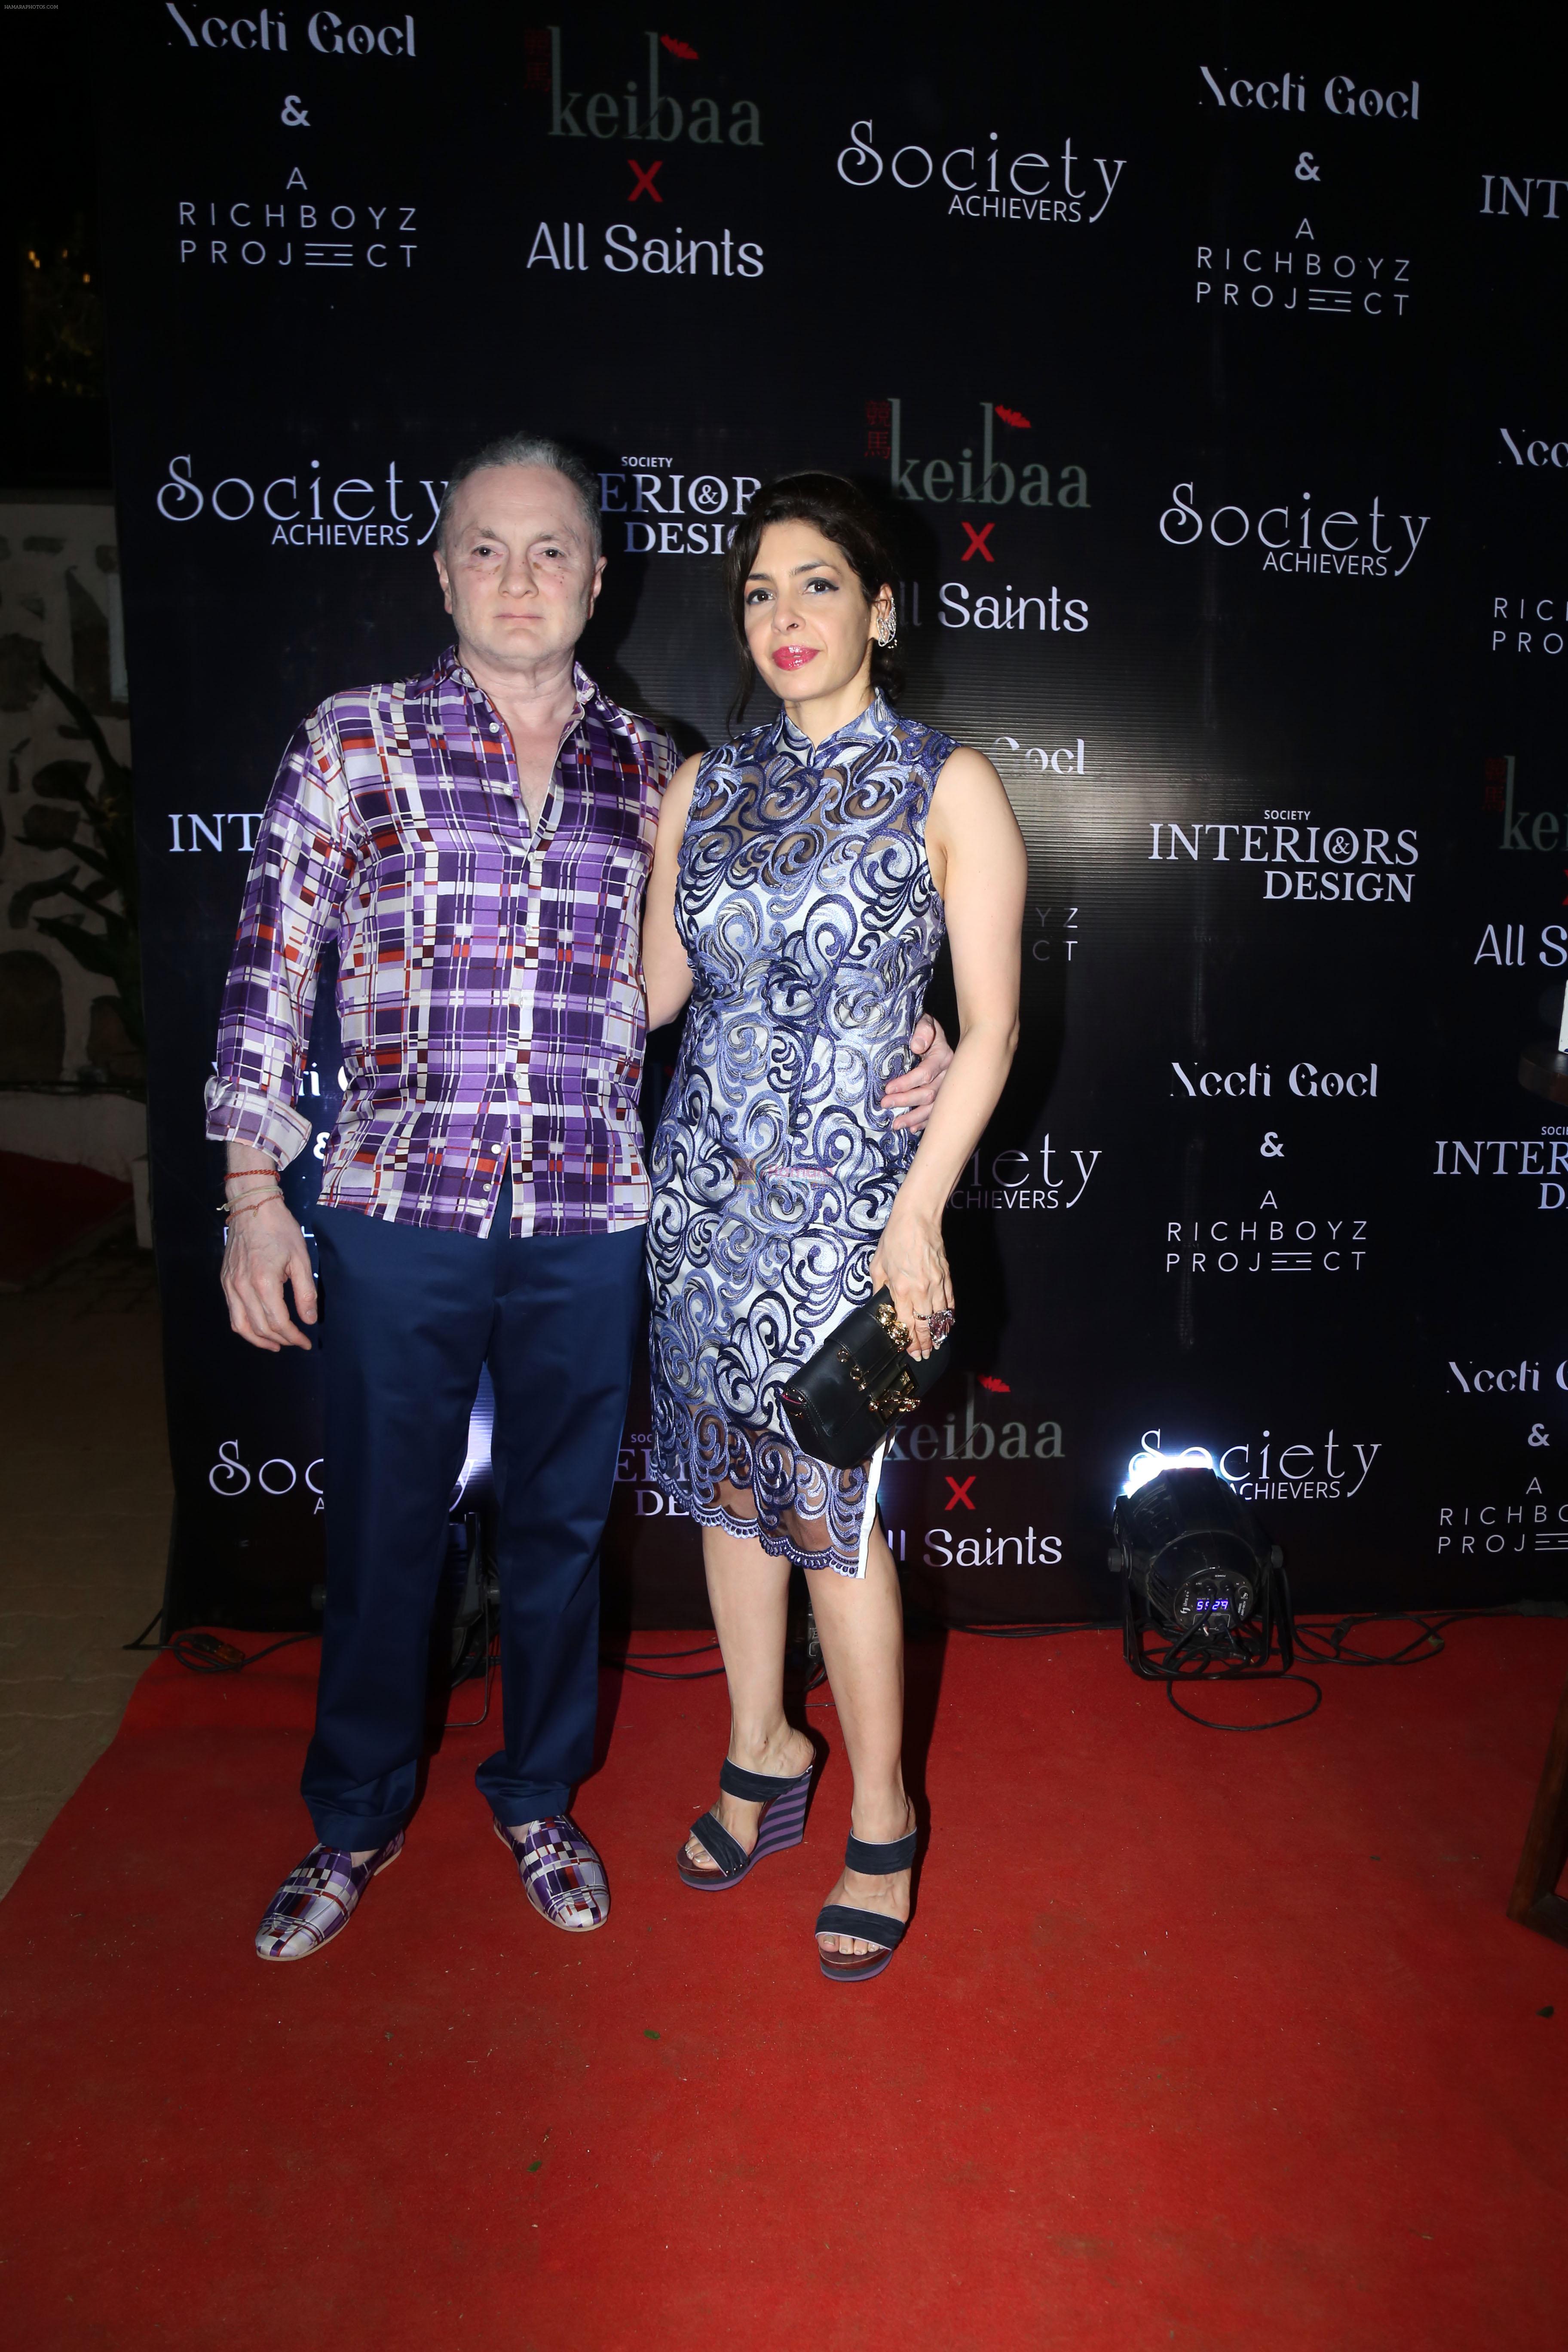 Gautam Singhania with wife Nawaz Modi Singhania at the ReOpening of Keibaa X All Saints and Celebration of Society Achievers and Society Interiors and Design Magazine